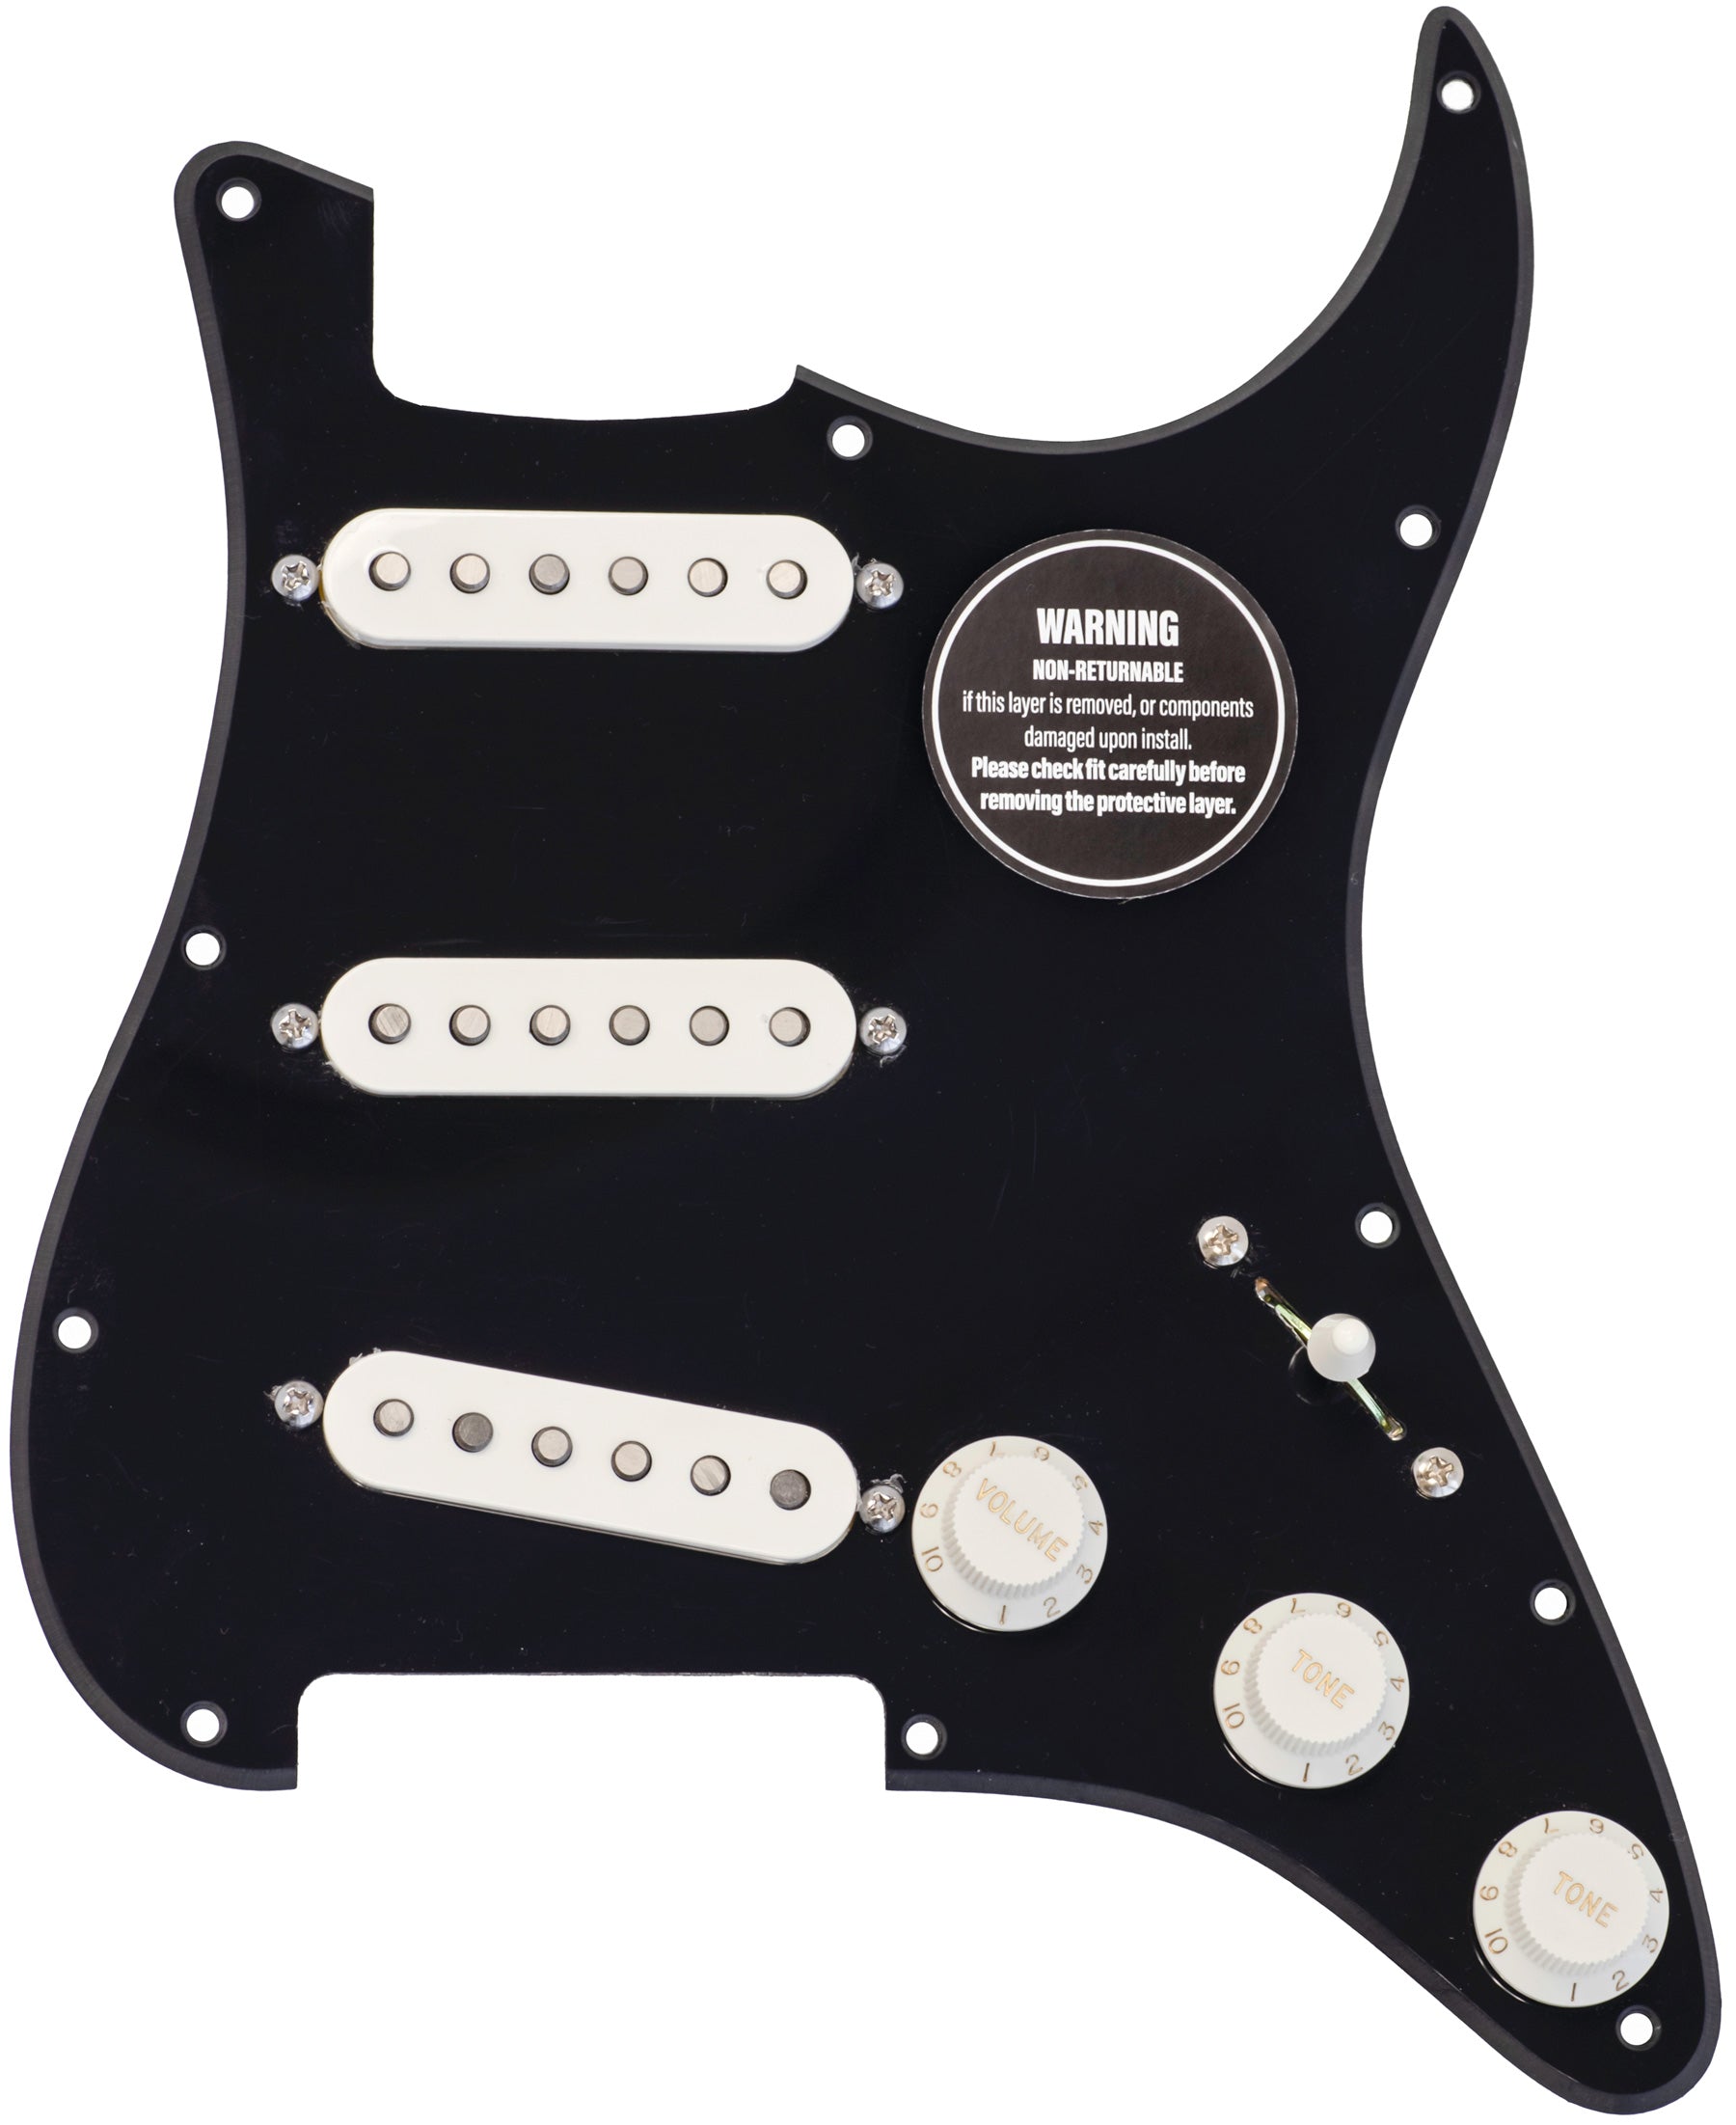 ObsidianWire prewired pickguard with 1 ply black and parchment white knobs and pickup covers